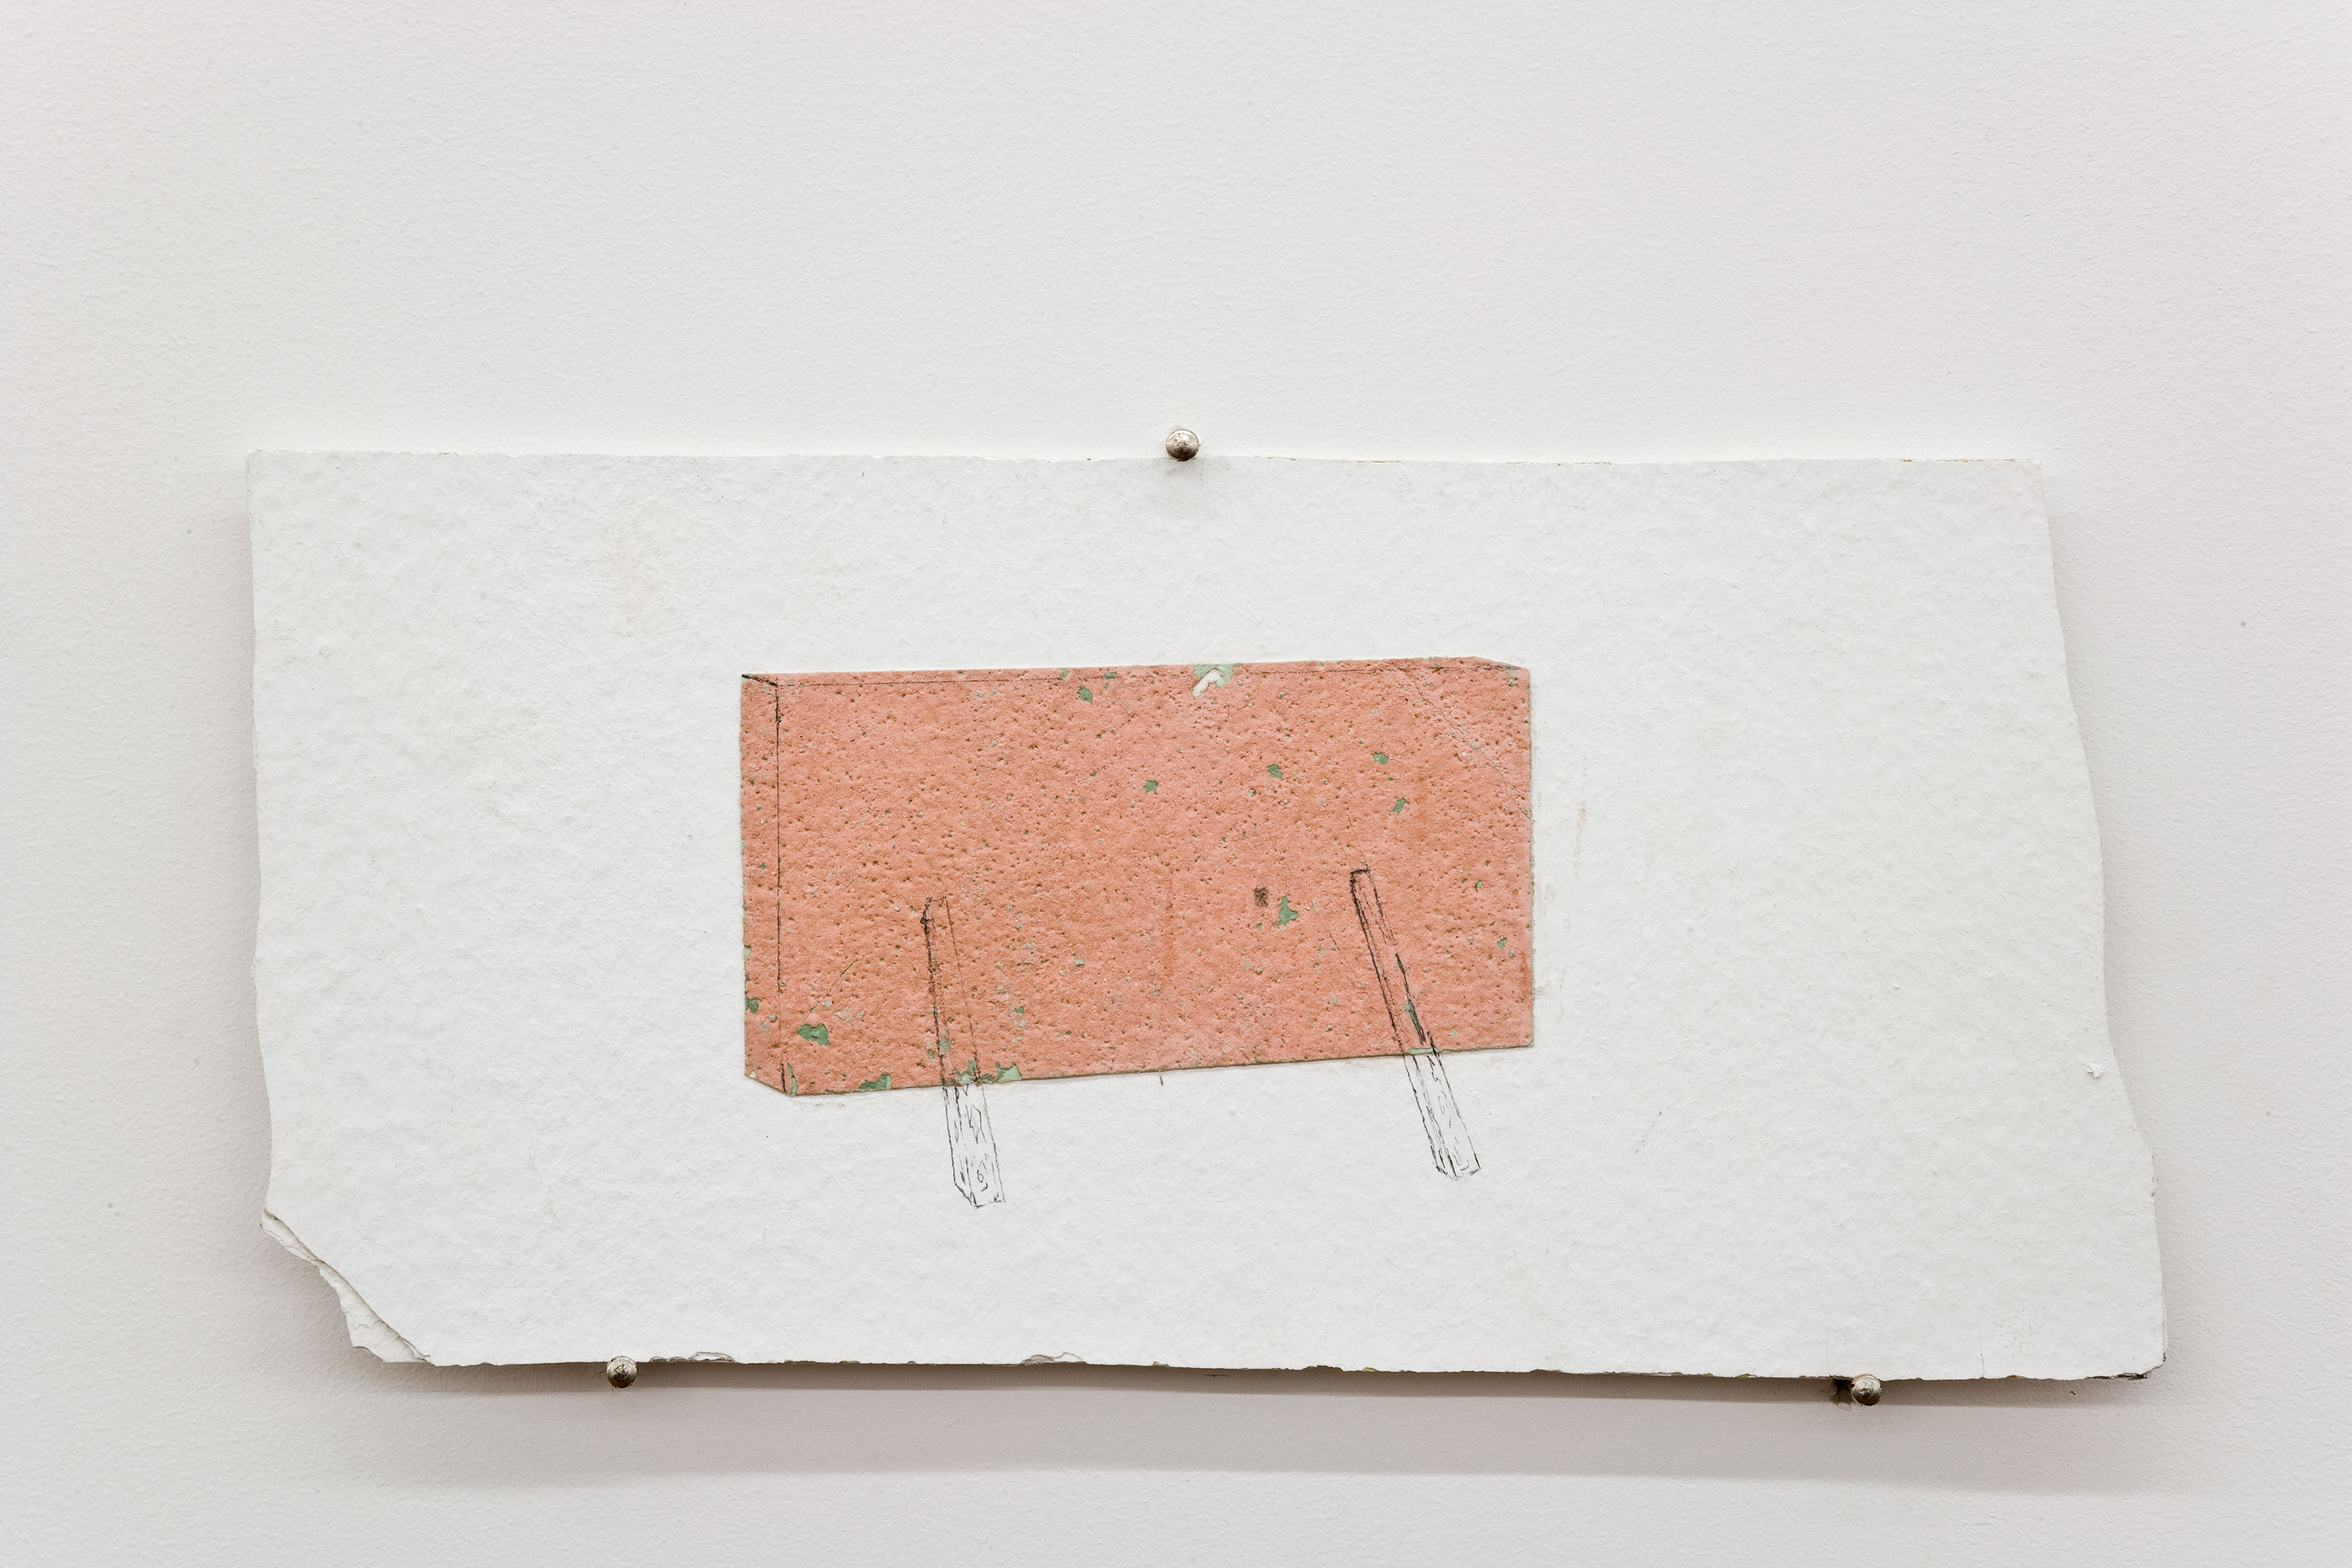 Untitled (Wall) from the series Bases efêmeras